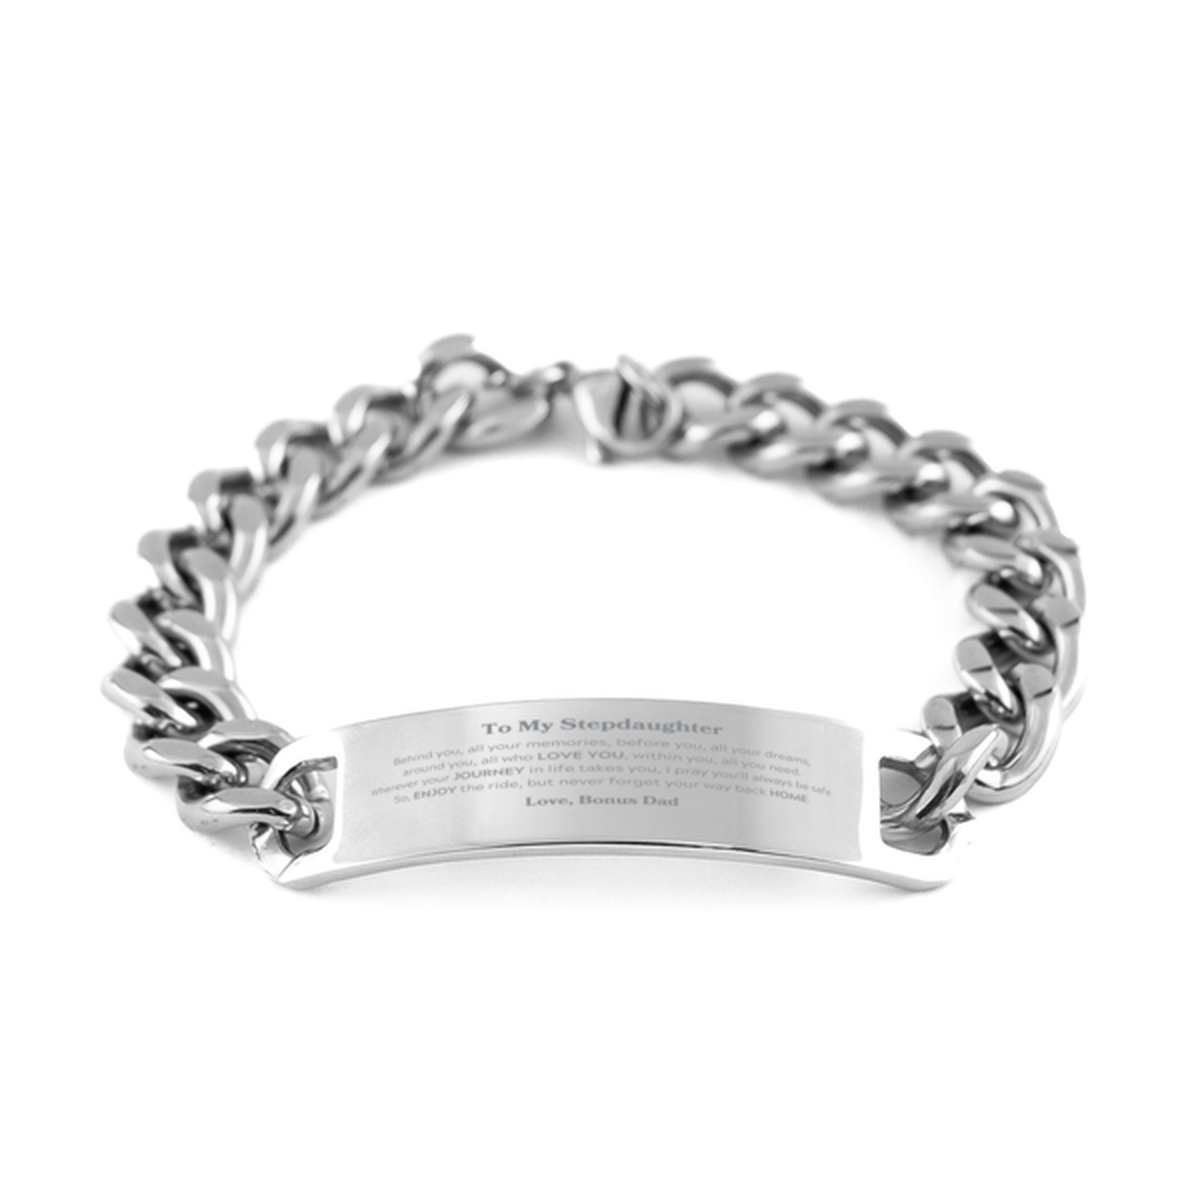 To My Stepdaughter Graduation Gifts from Bonus Dad, Stepdaughter Cuban Chain Stainless Steel Bracelet Christmas Birthday Gifts for Stepdaughter Behind you, all your memories, before you, all your dreams. Love, Bonus Dad